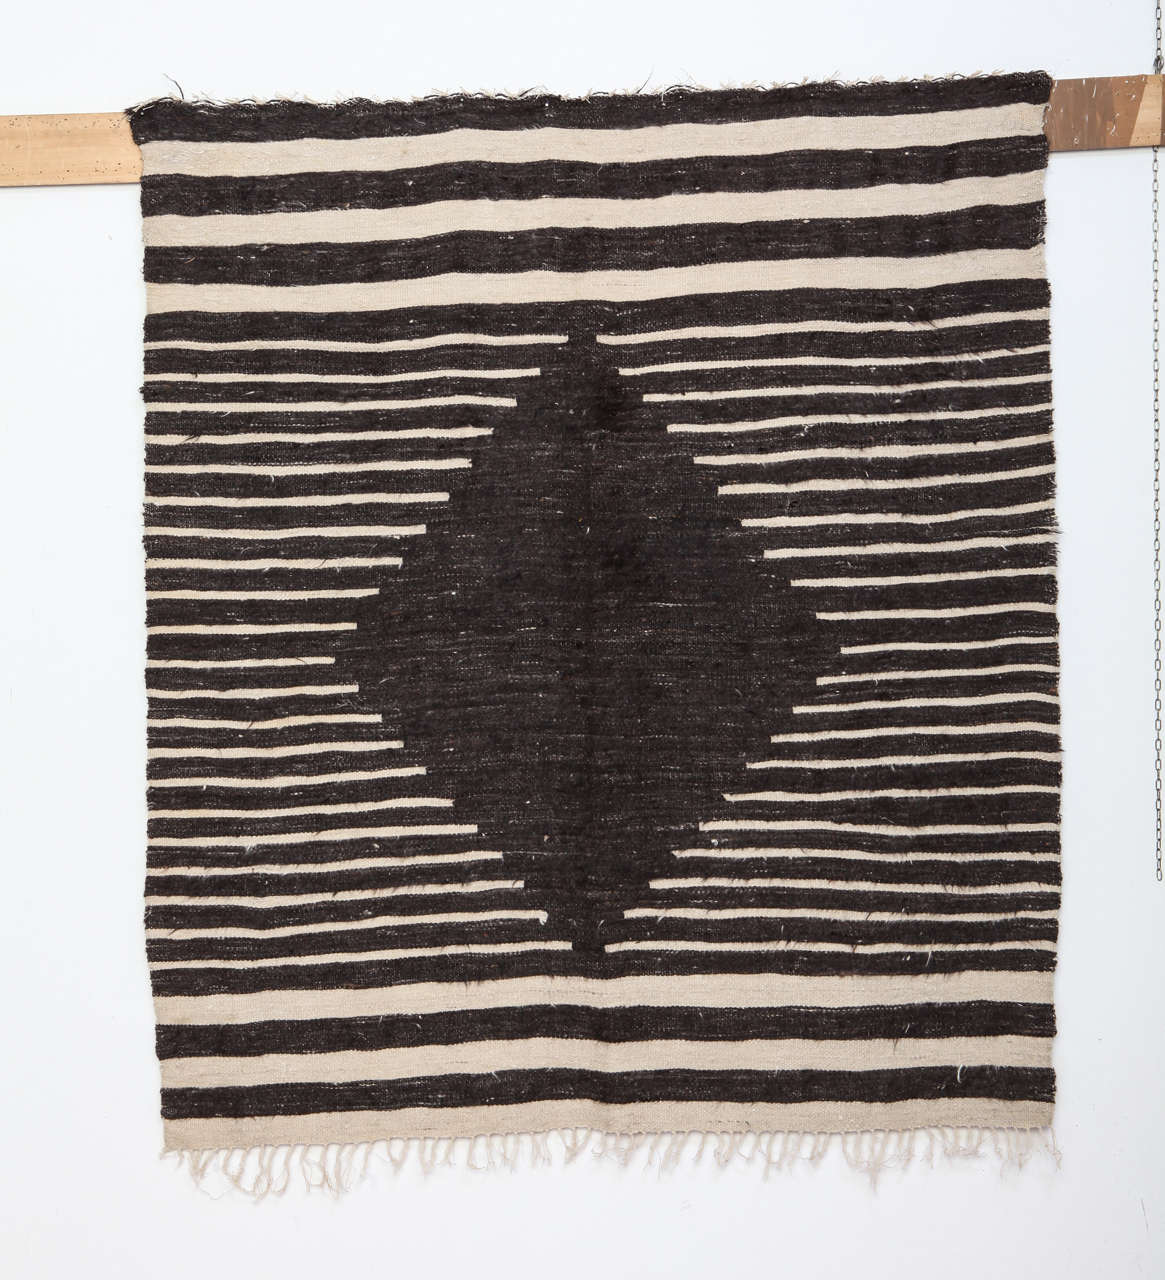 Woven in soft angora wool, flat-weaves such as this one are attributed to the eastern Anatolian village of Siirt, an area populated by Kurdish people. Typically in a small. Squarish format, they represent yet another example of the modern